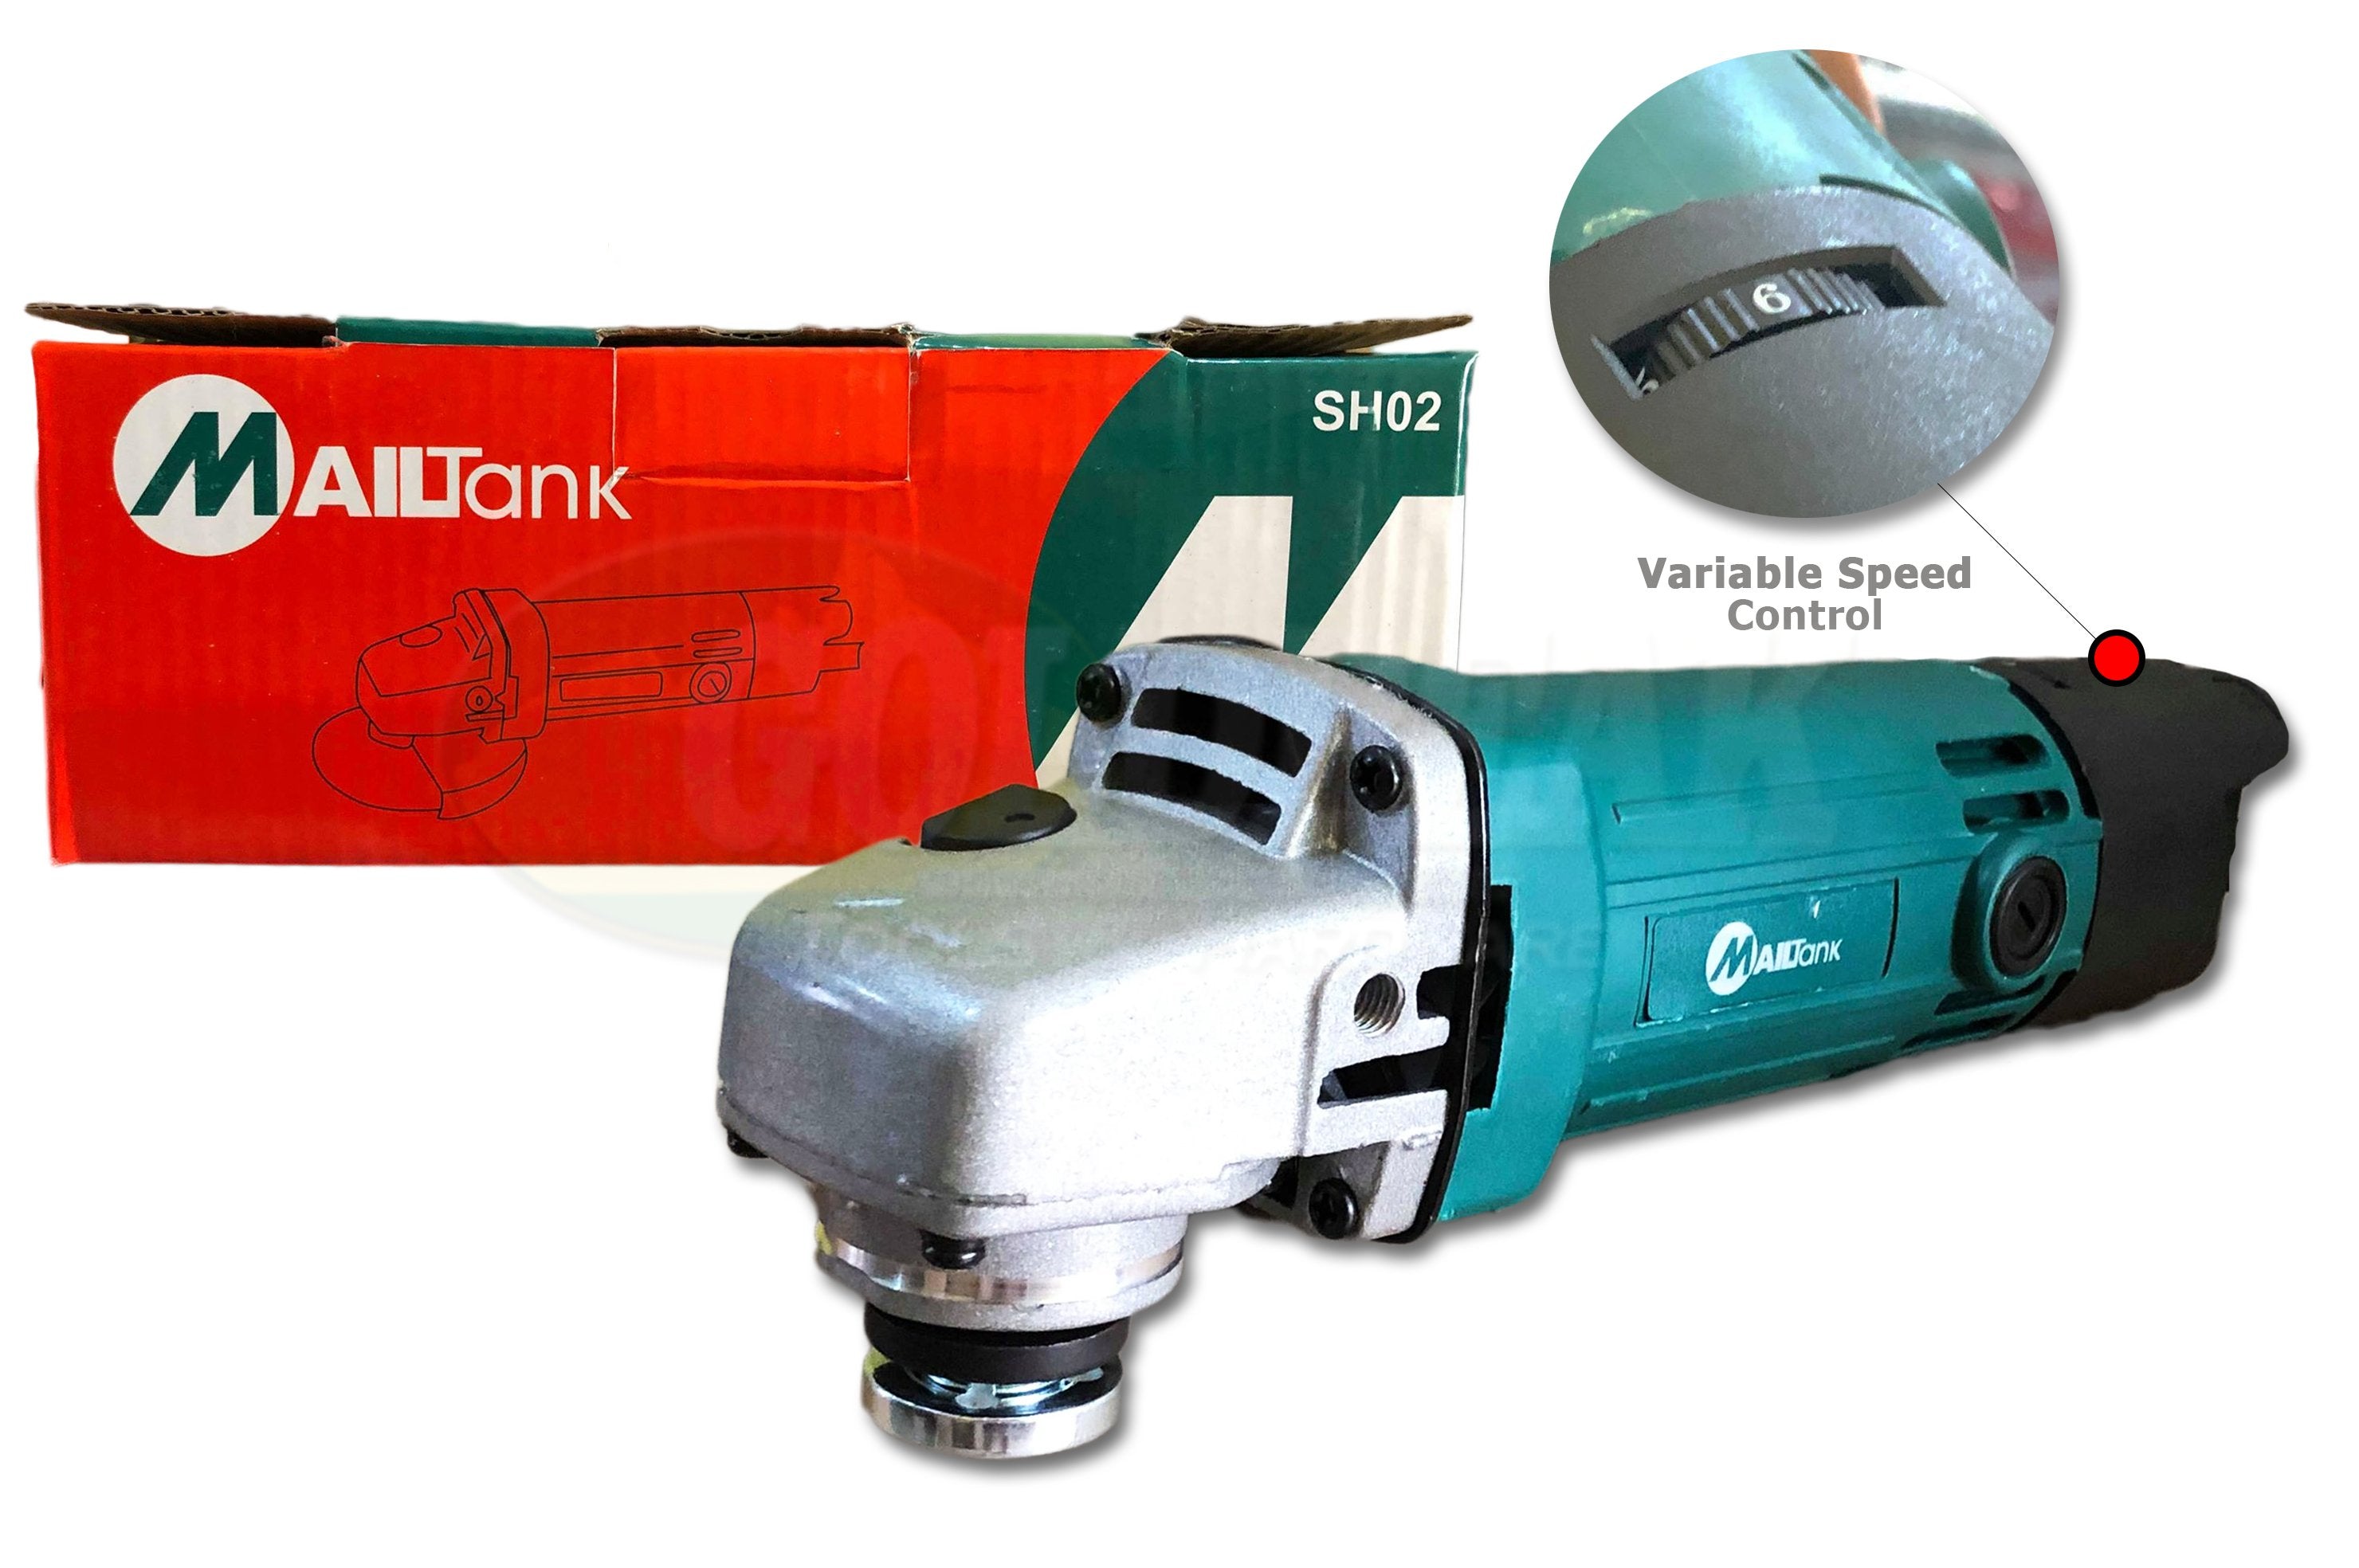 Mailtank SH02 Angle Grinder 4" (Variable Speed) - ToolsSavvy.ph